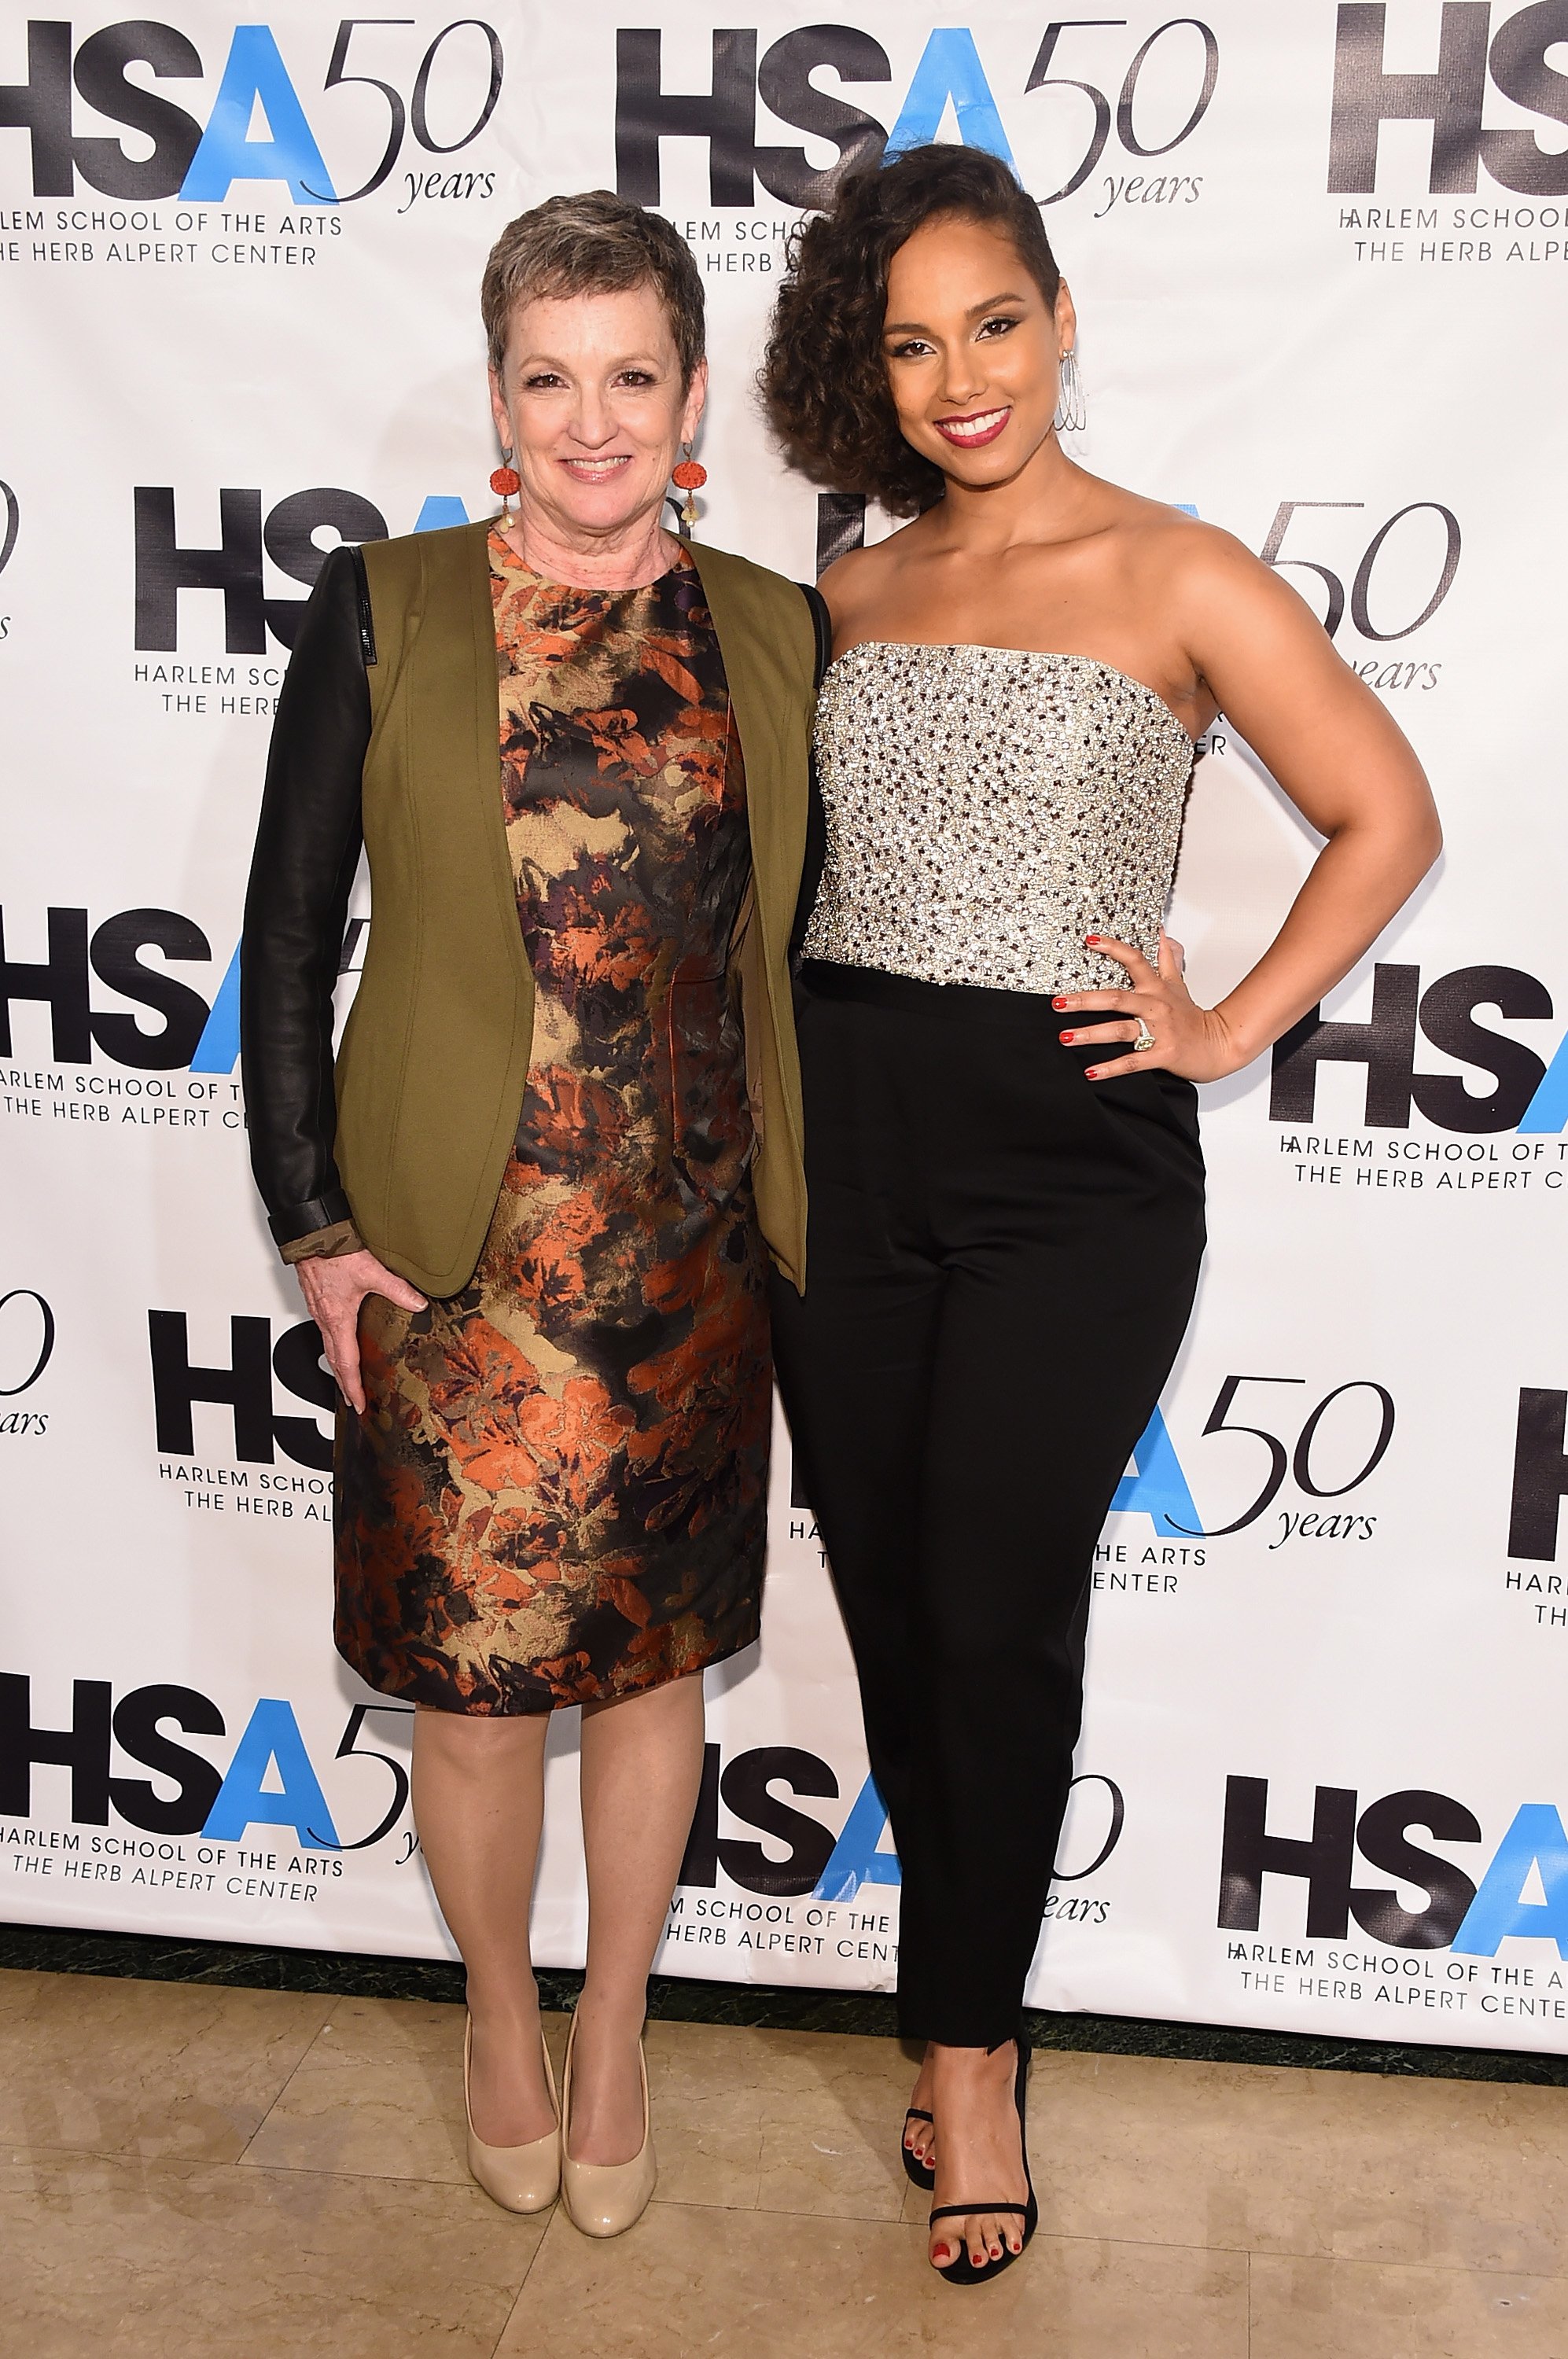 Terria Joseph and Alicia Keys at the Harlem School of the Arts 50th anniversary kickoff on October 5, 2015, in New York City. | Source: Michael Loccisano/Getty Images